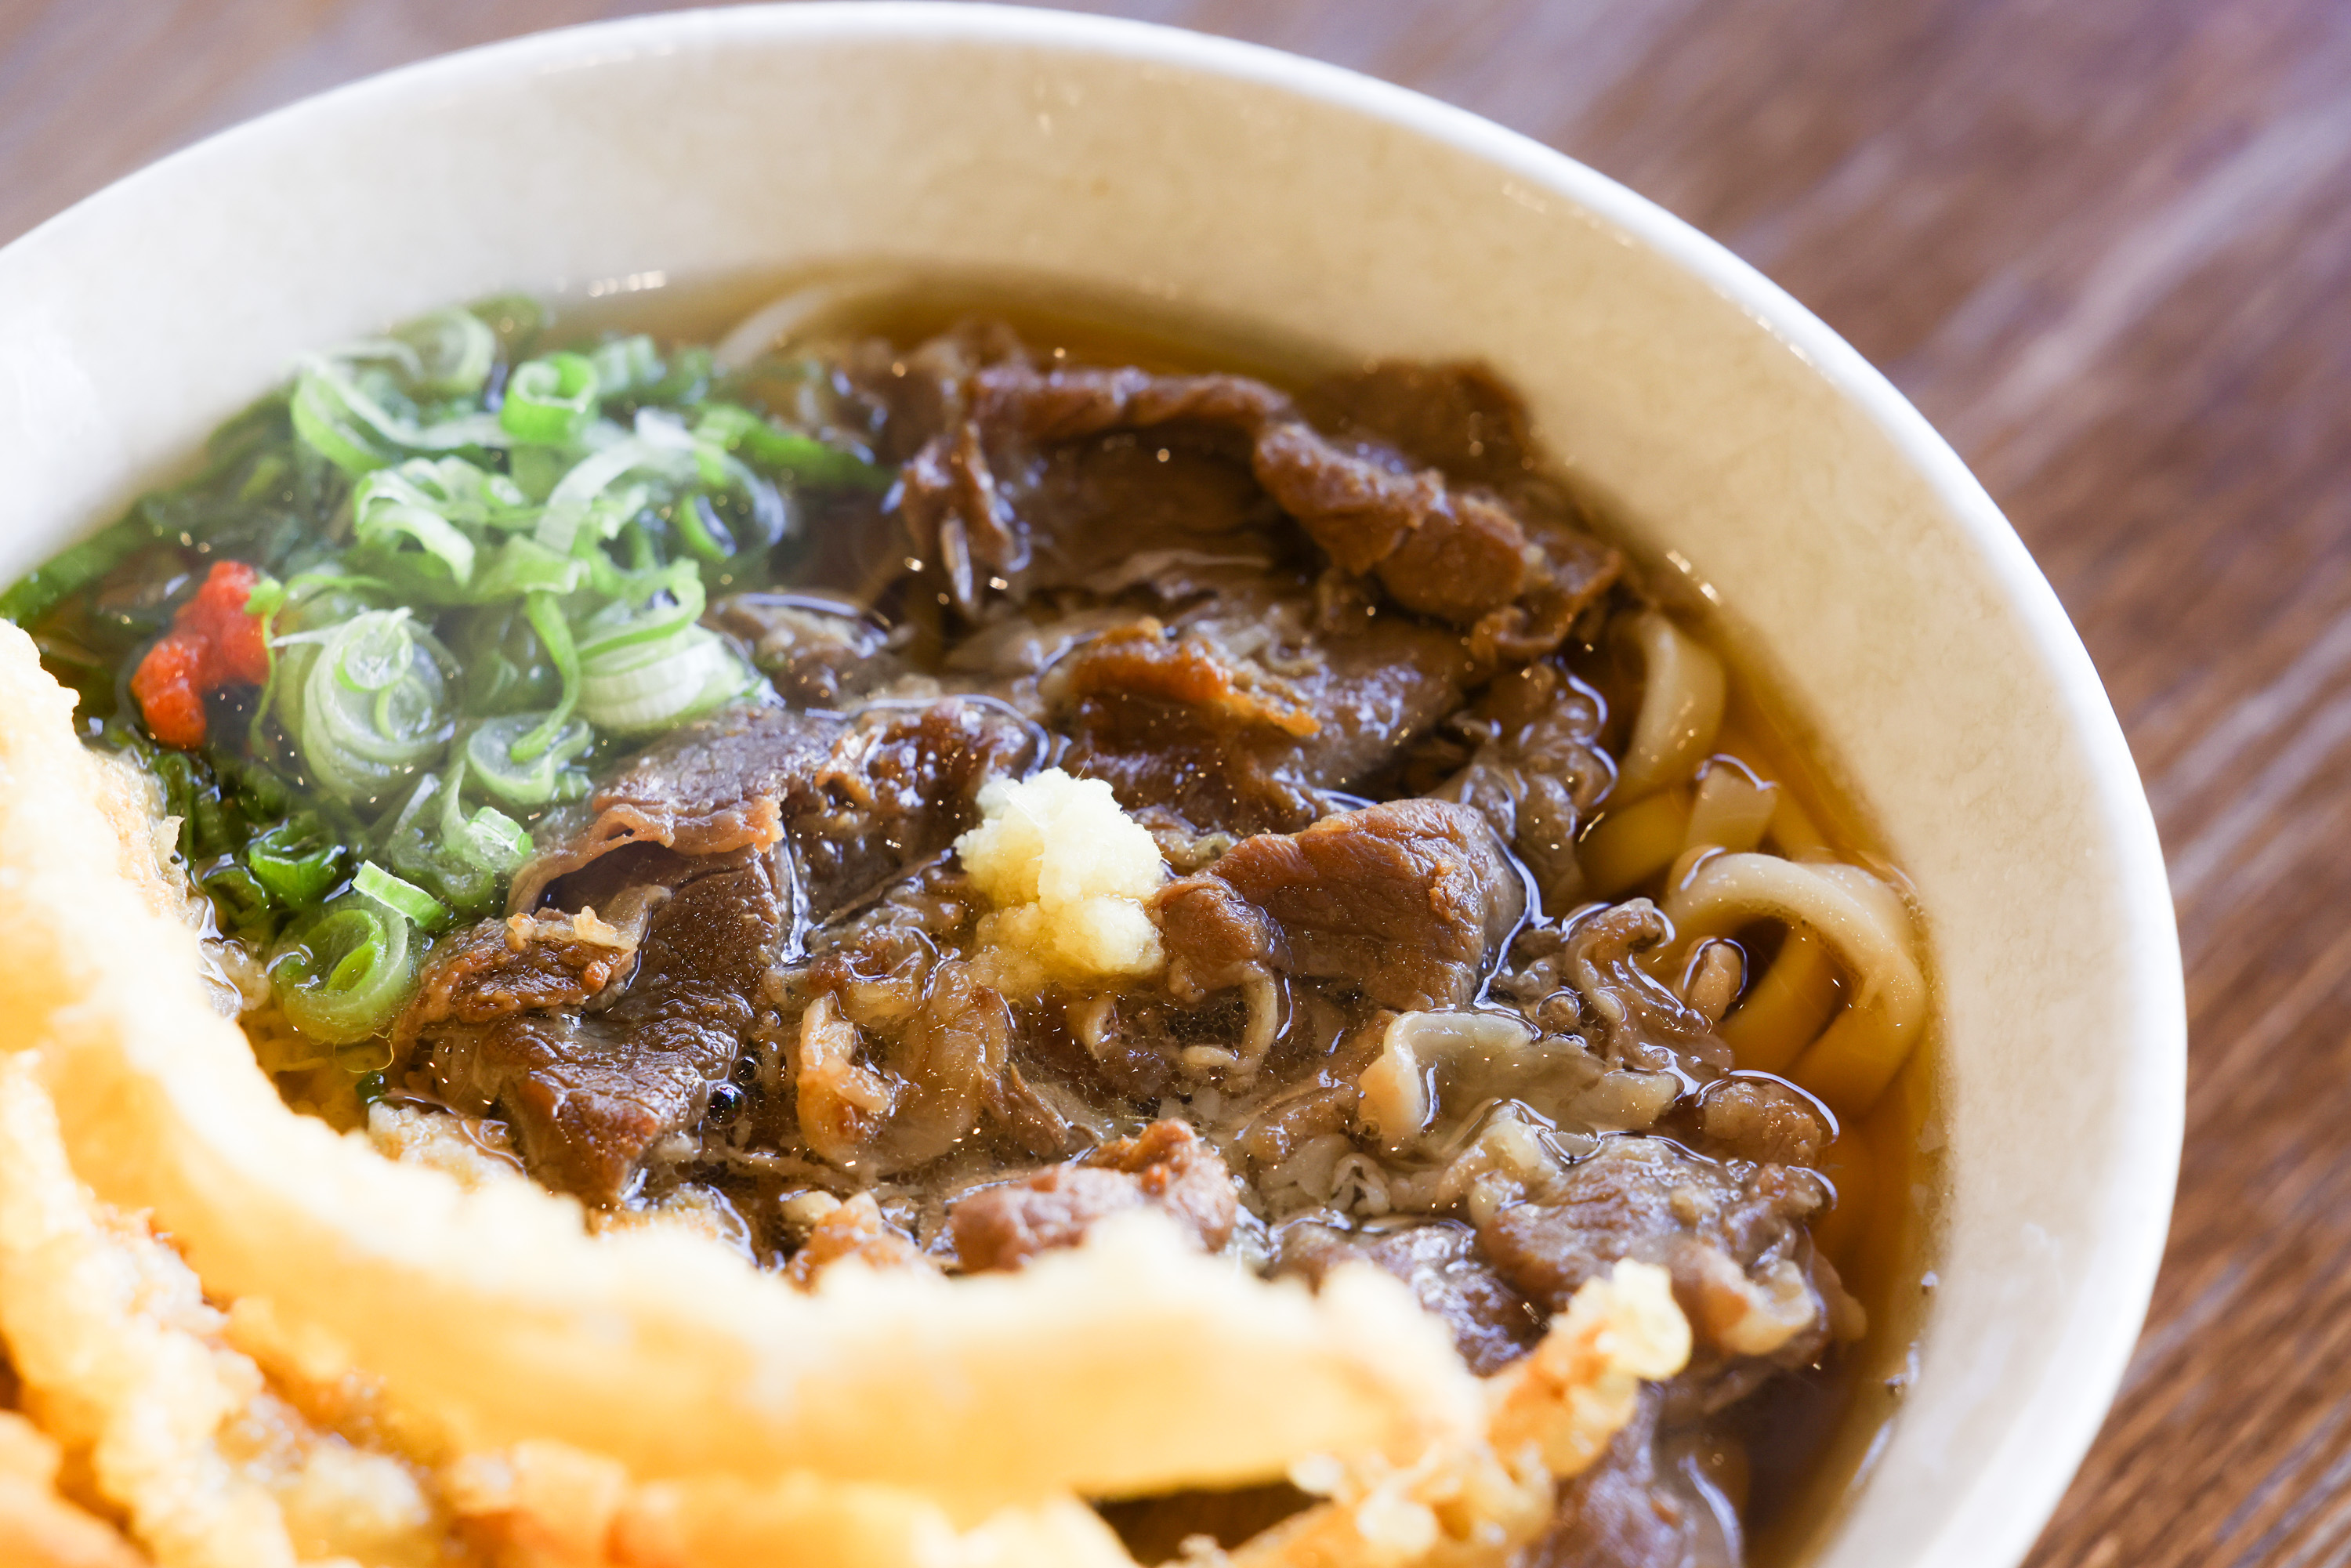 A bowl of beef udon with tempura, garnished with green onions and red spices.